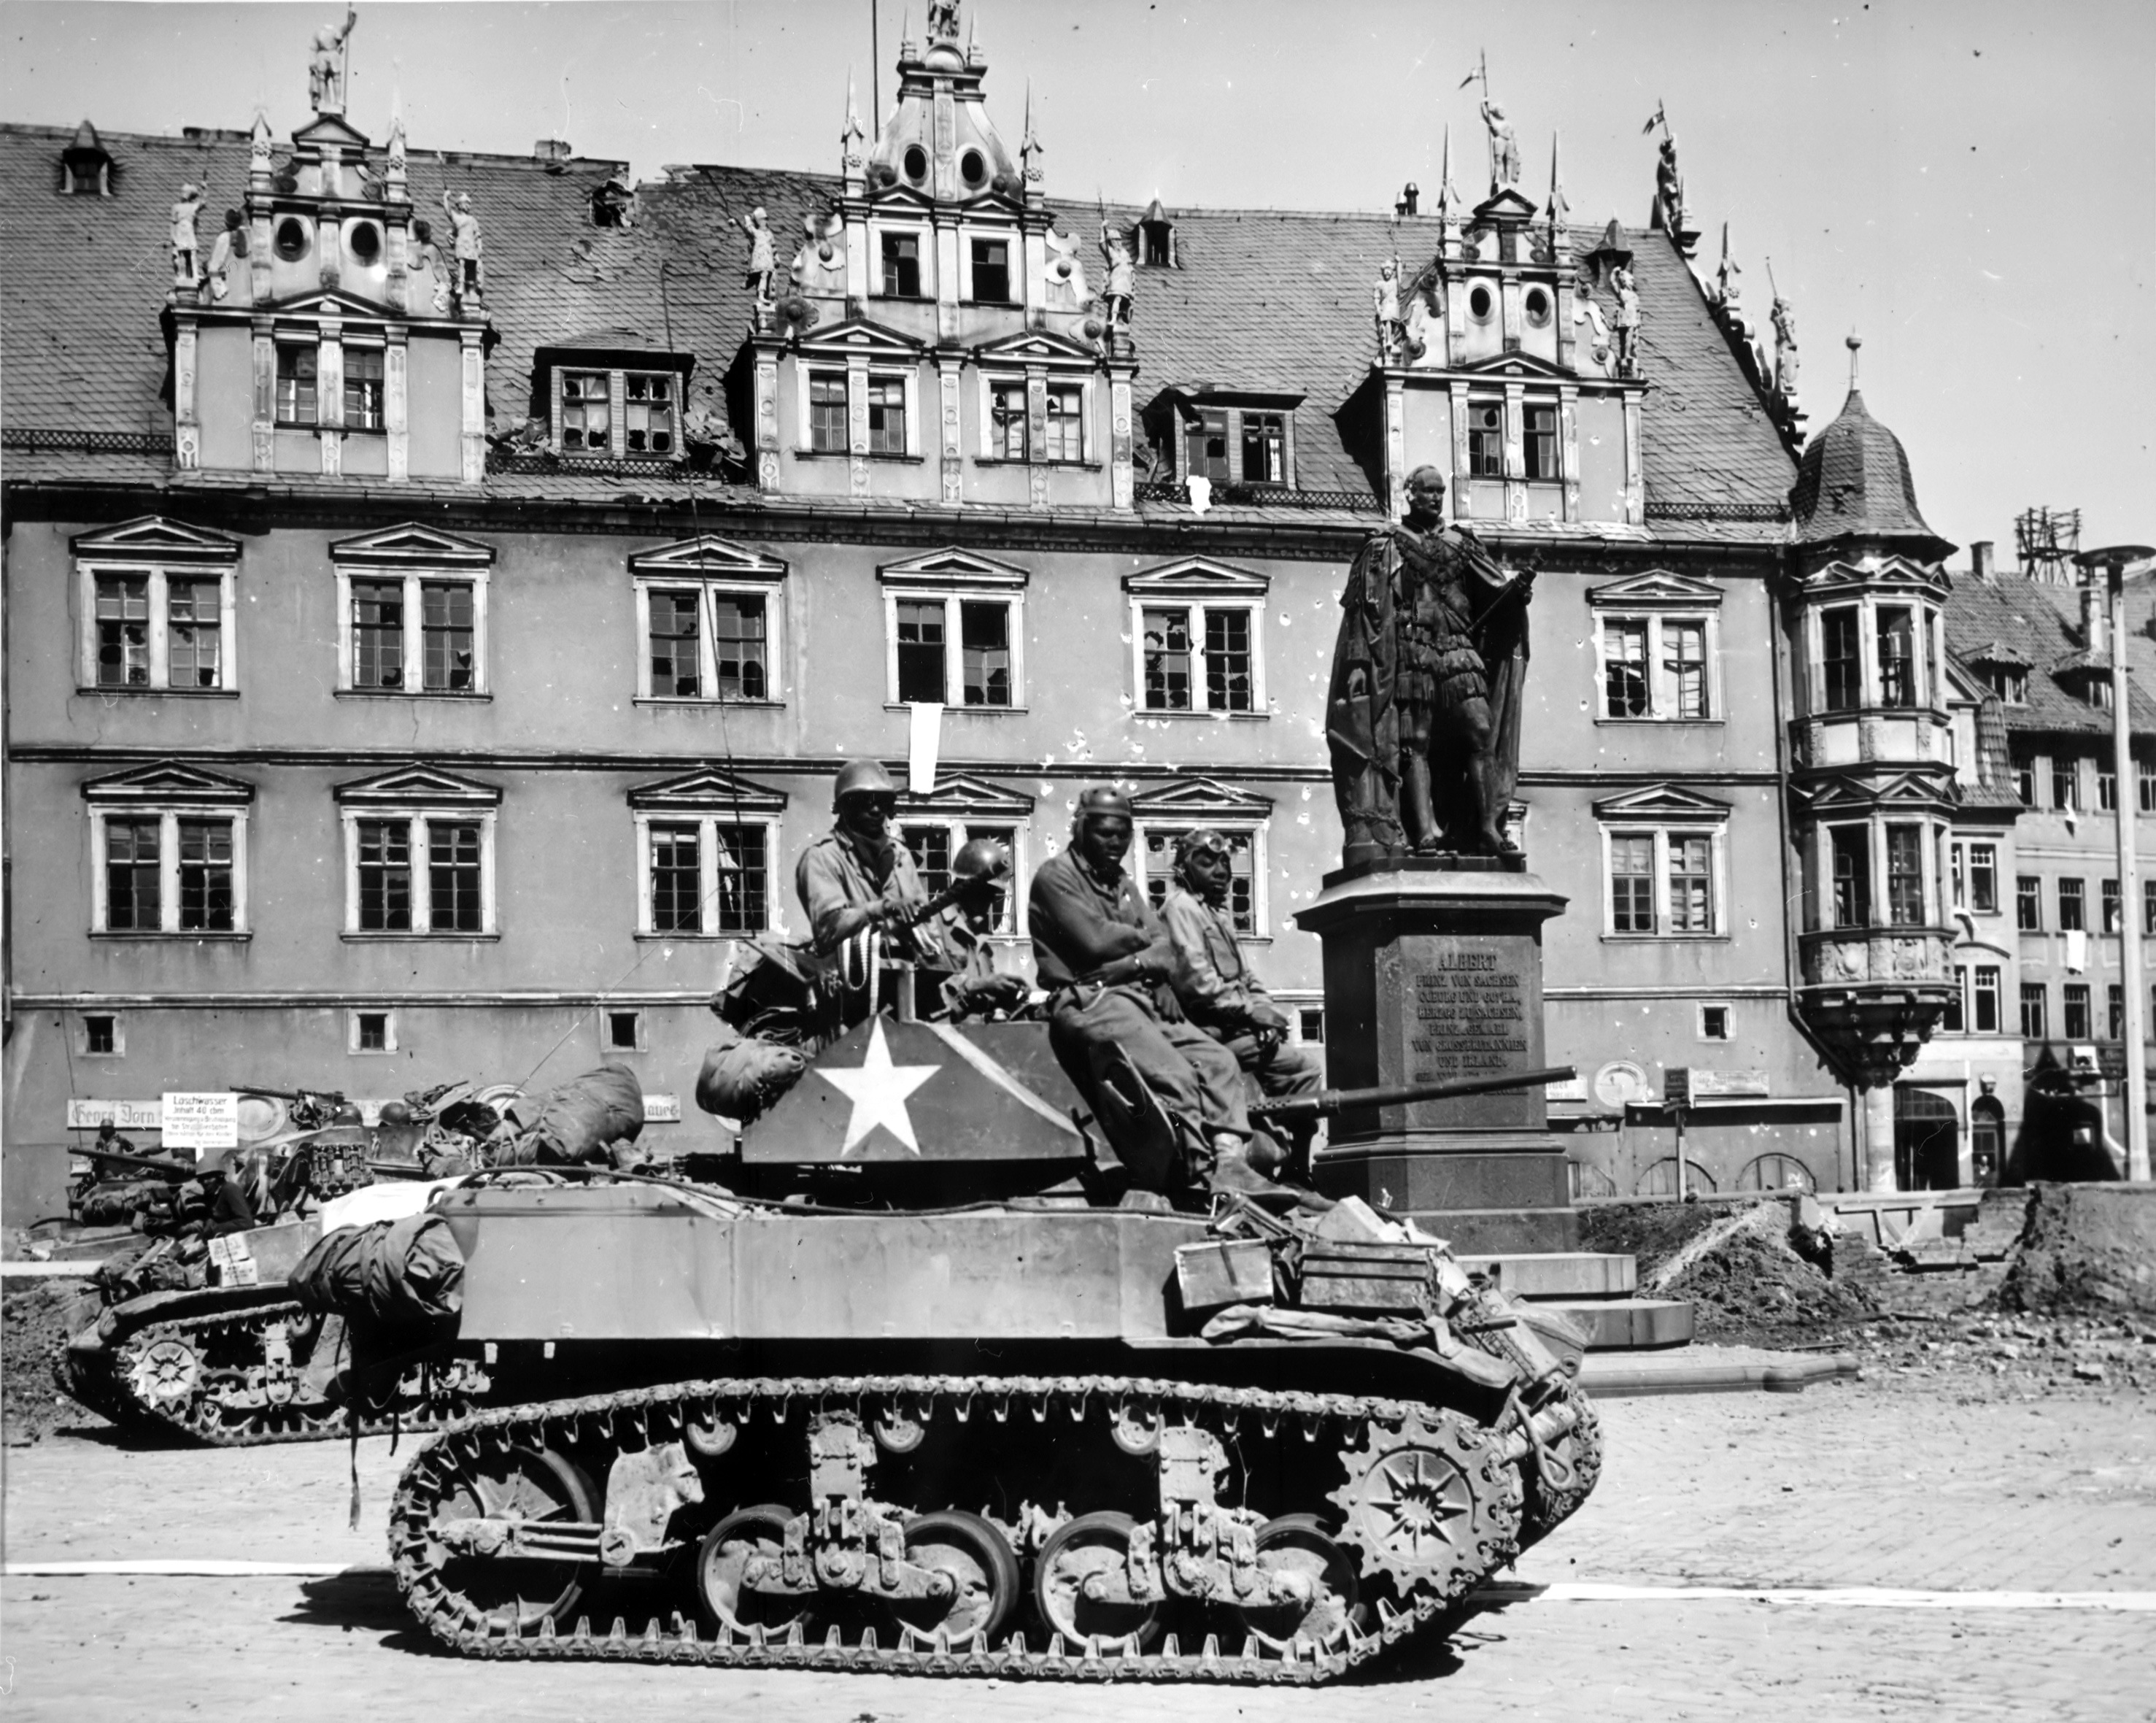 Photo Us Army African American Crew Of The 761st Tank Battalion On A M5a1 Stuart Light Tank In Coburg Bayreuth Germany 25 Apr 1945 Note White Flags Hanging From Upper Palace Windows Also